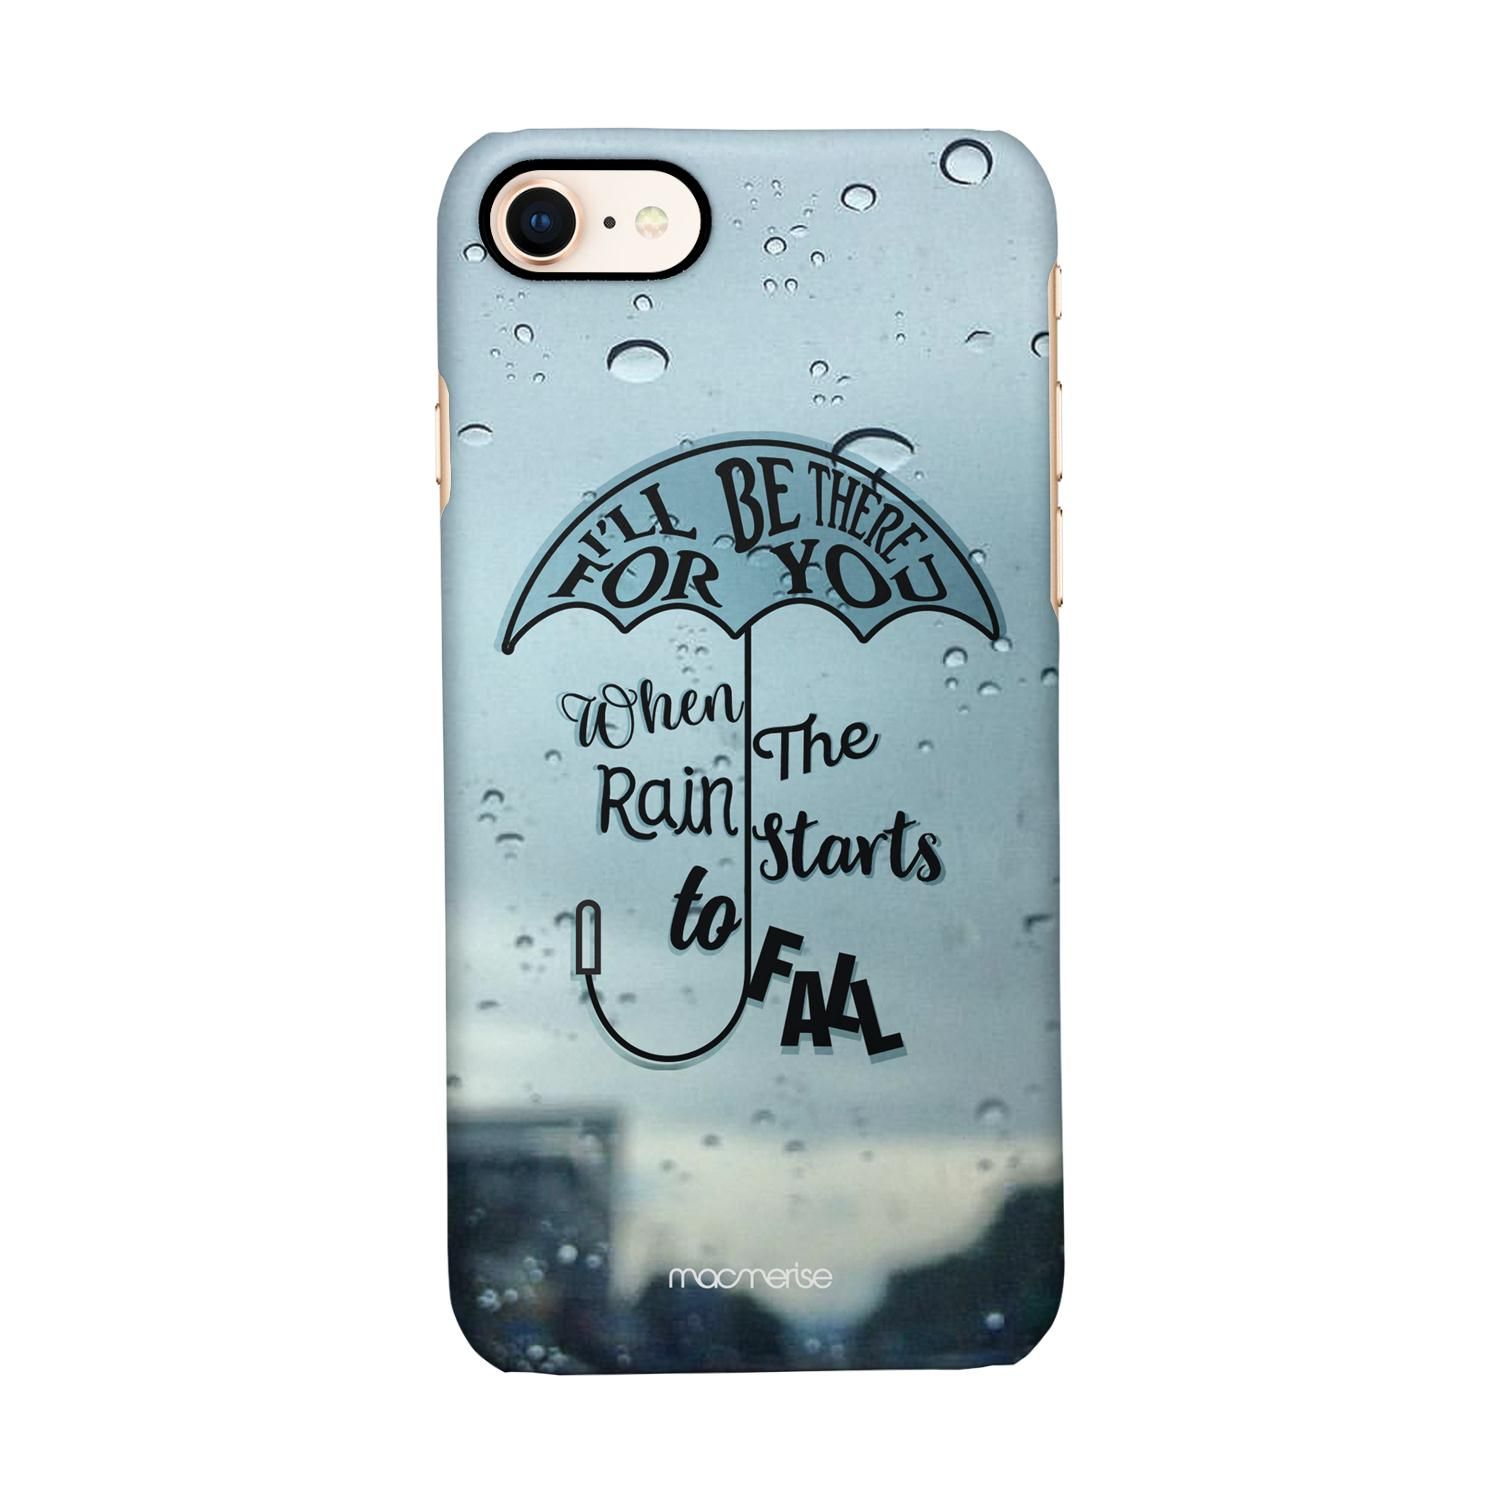 Buy Be There for You - Sleek Phone Case for iPhone 8 Online